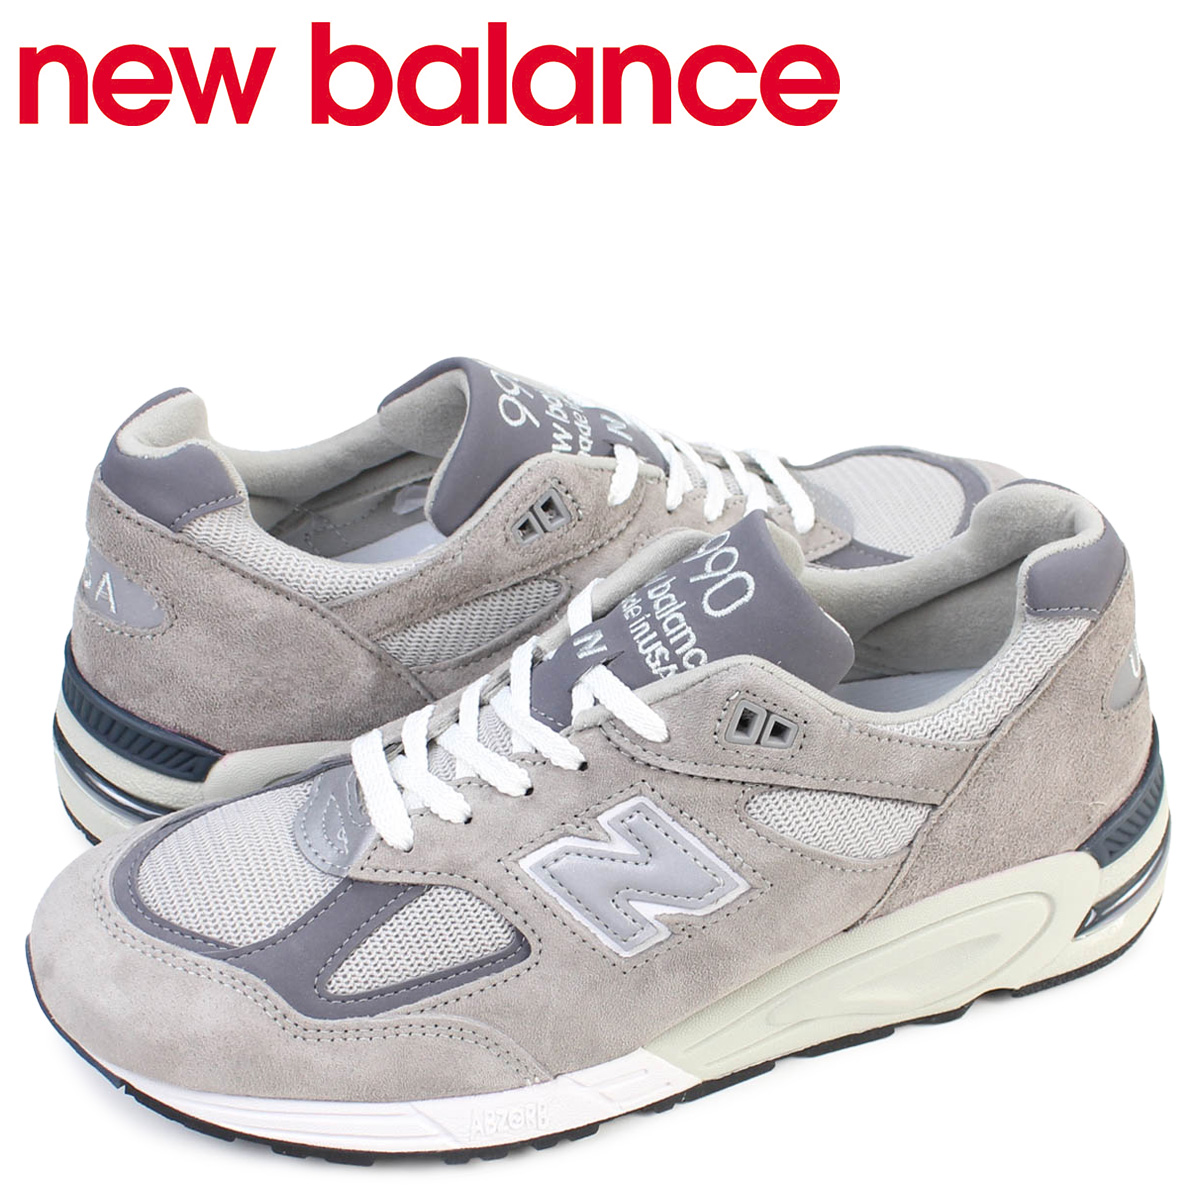 new balance men's walking shoes made in usa